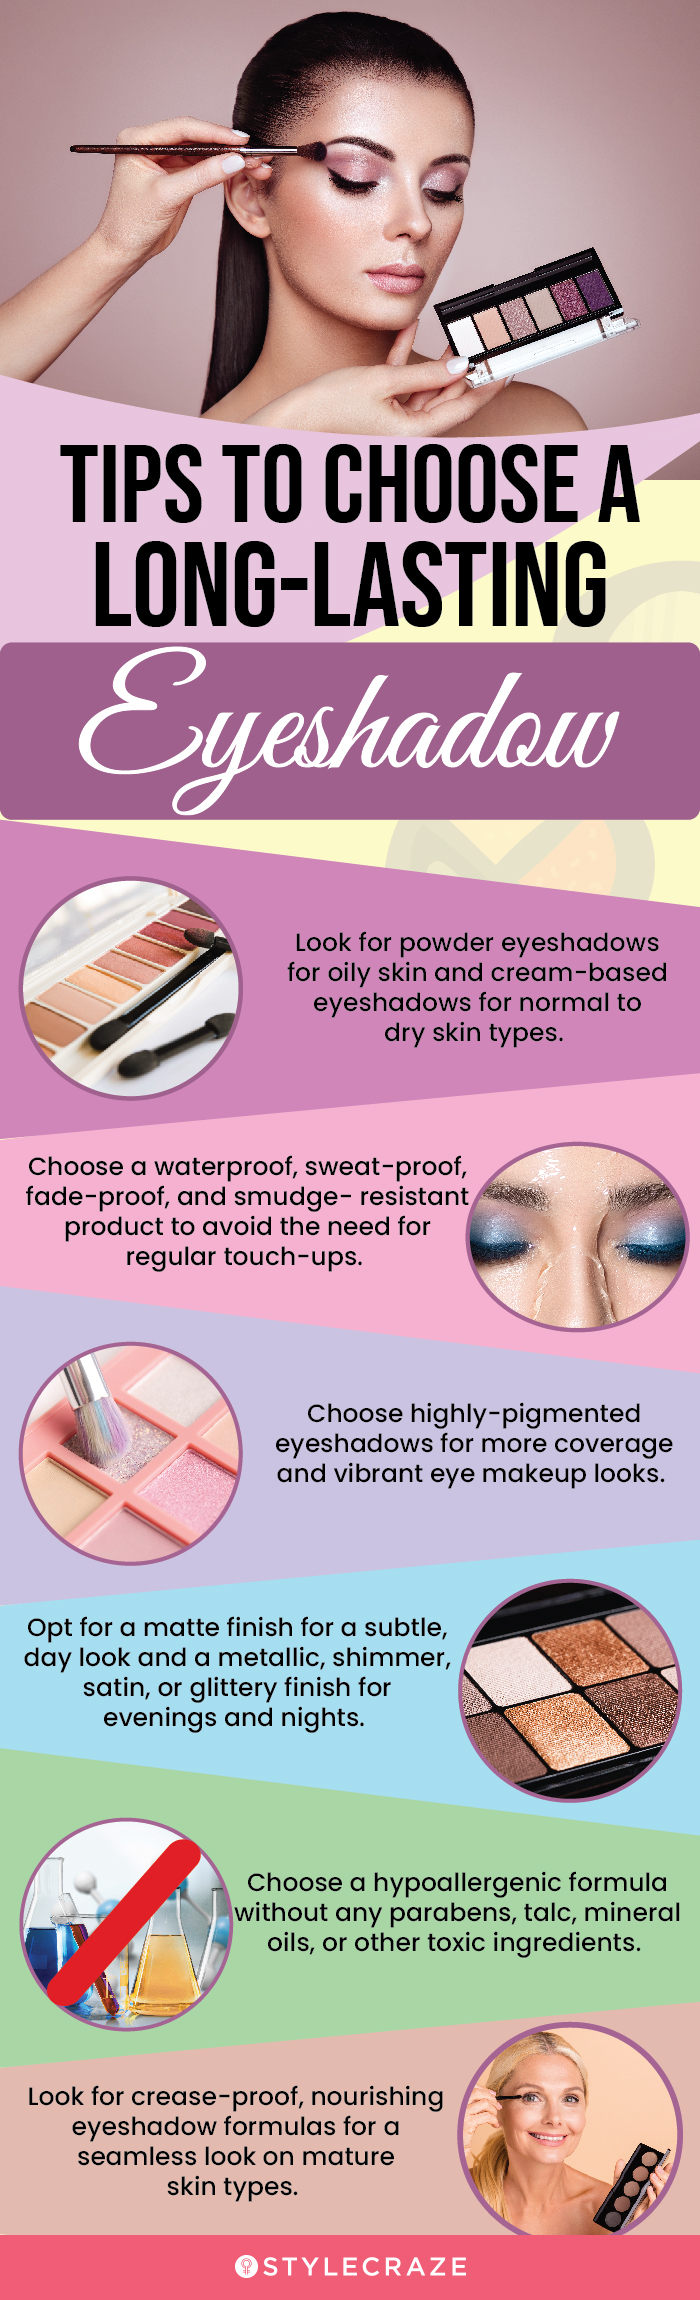 Tips To Choose A long-Lasting Eyeshadow (infographic)